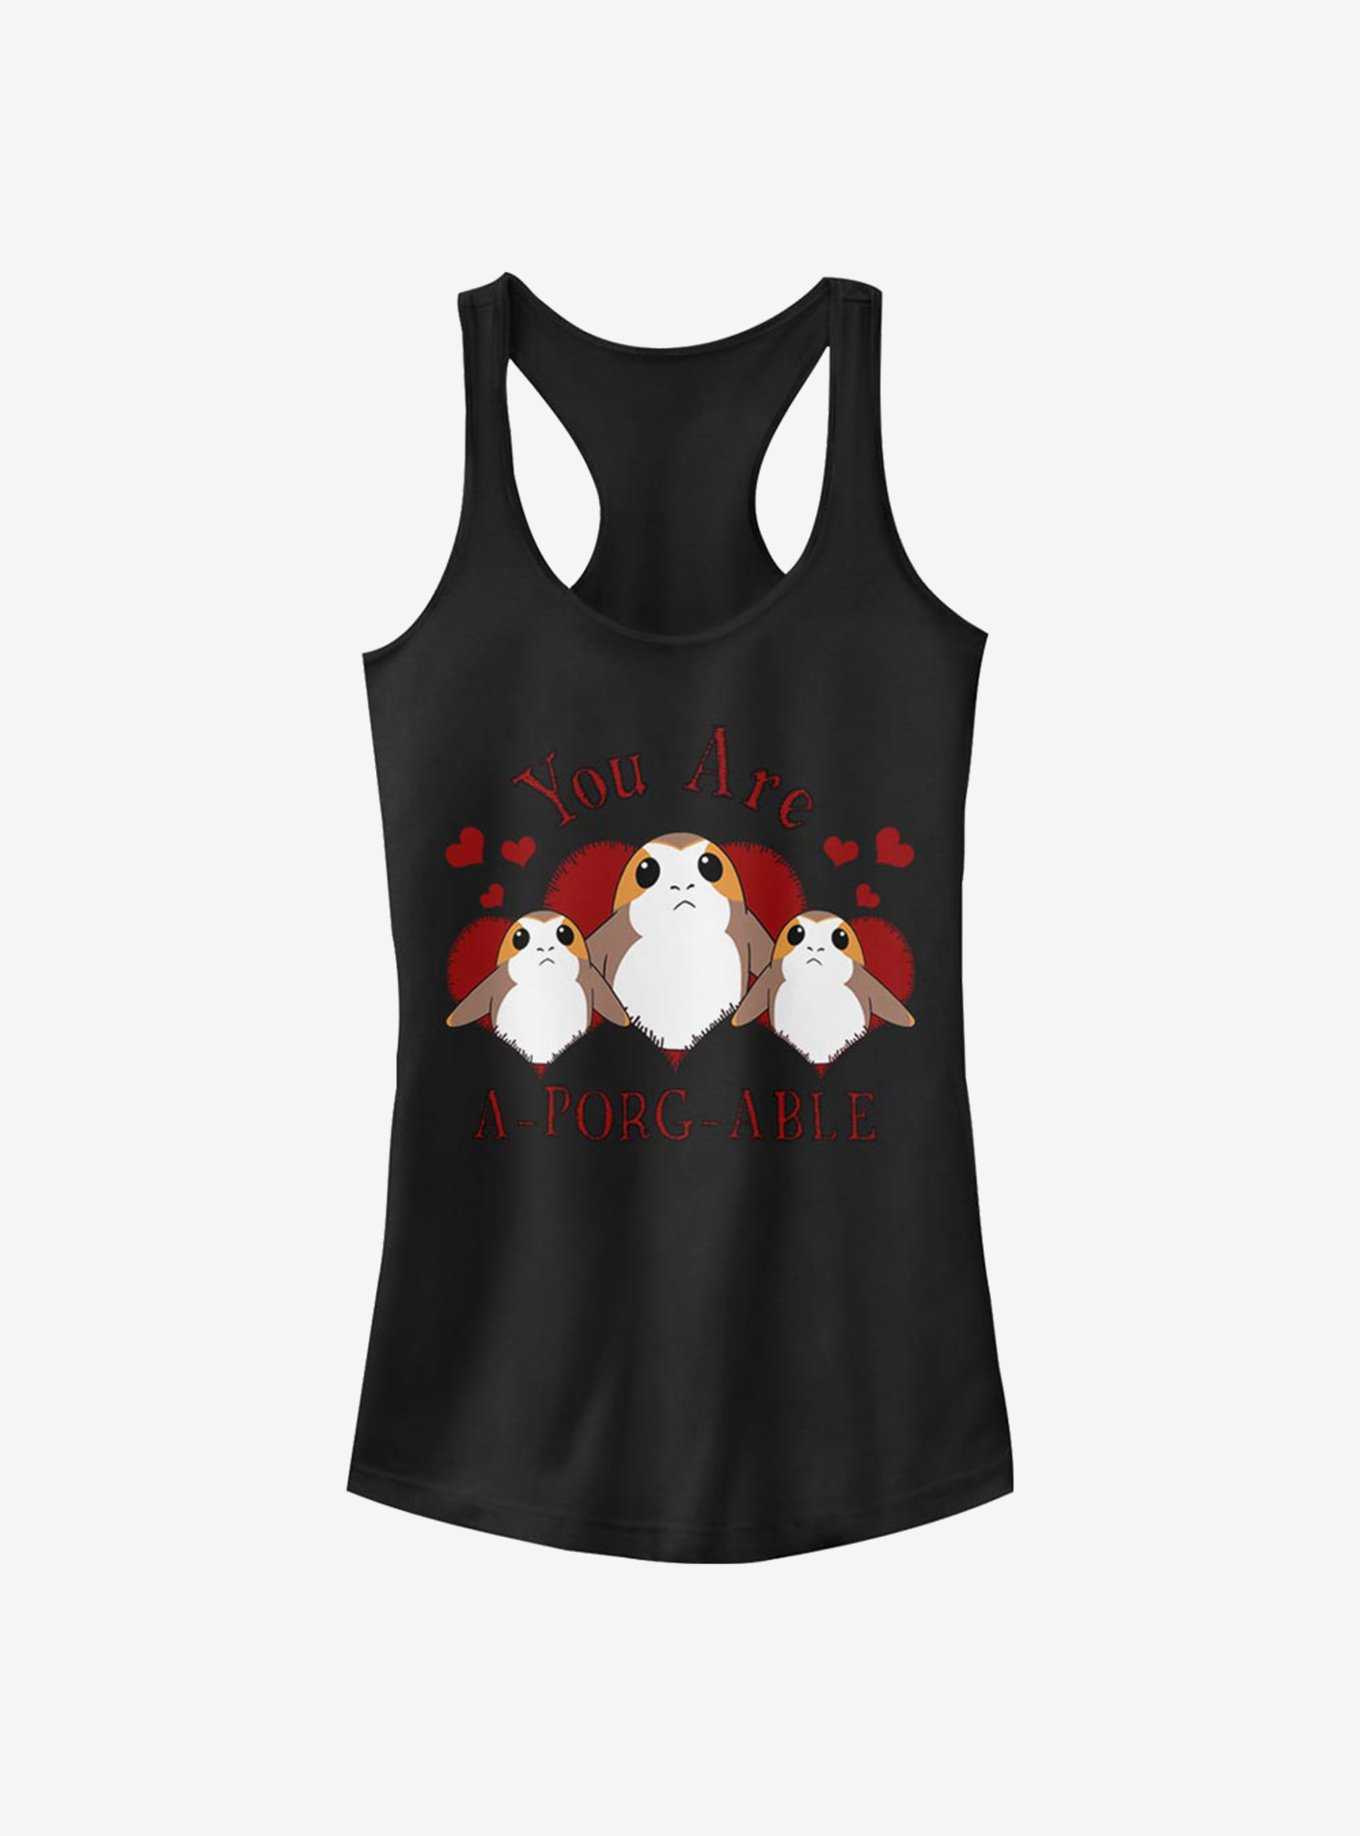 Star Wars: The Last Jedi A-Porg-Able Girls Tank, , hi-res